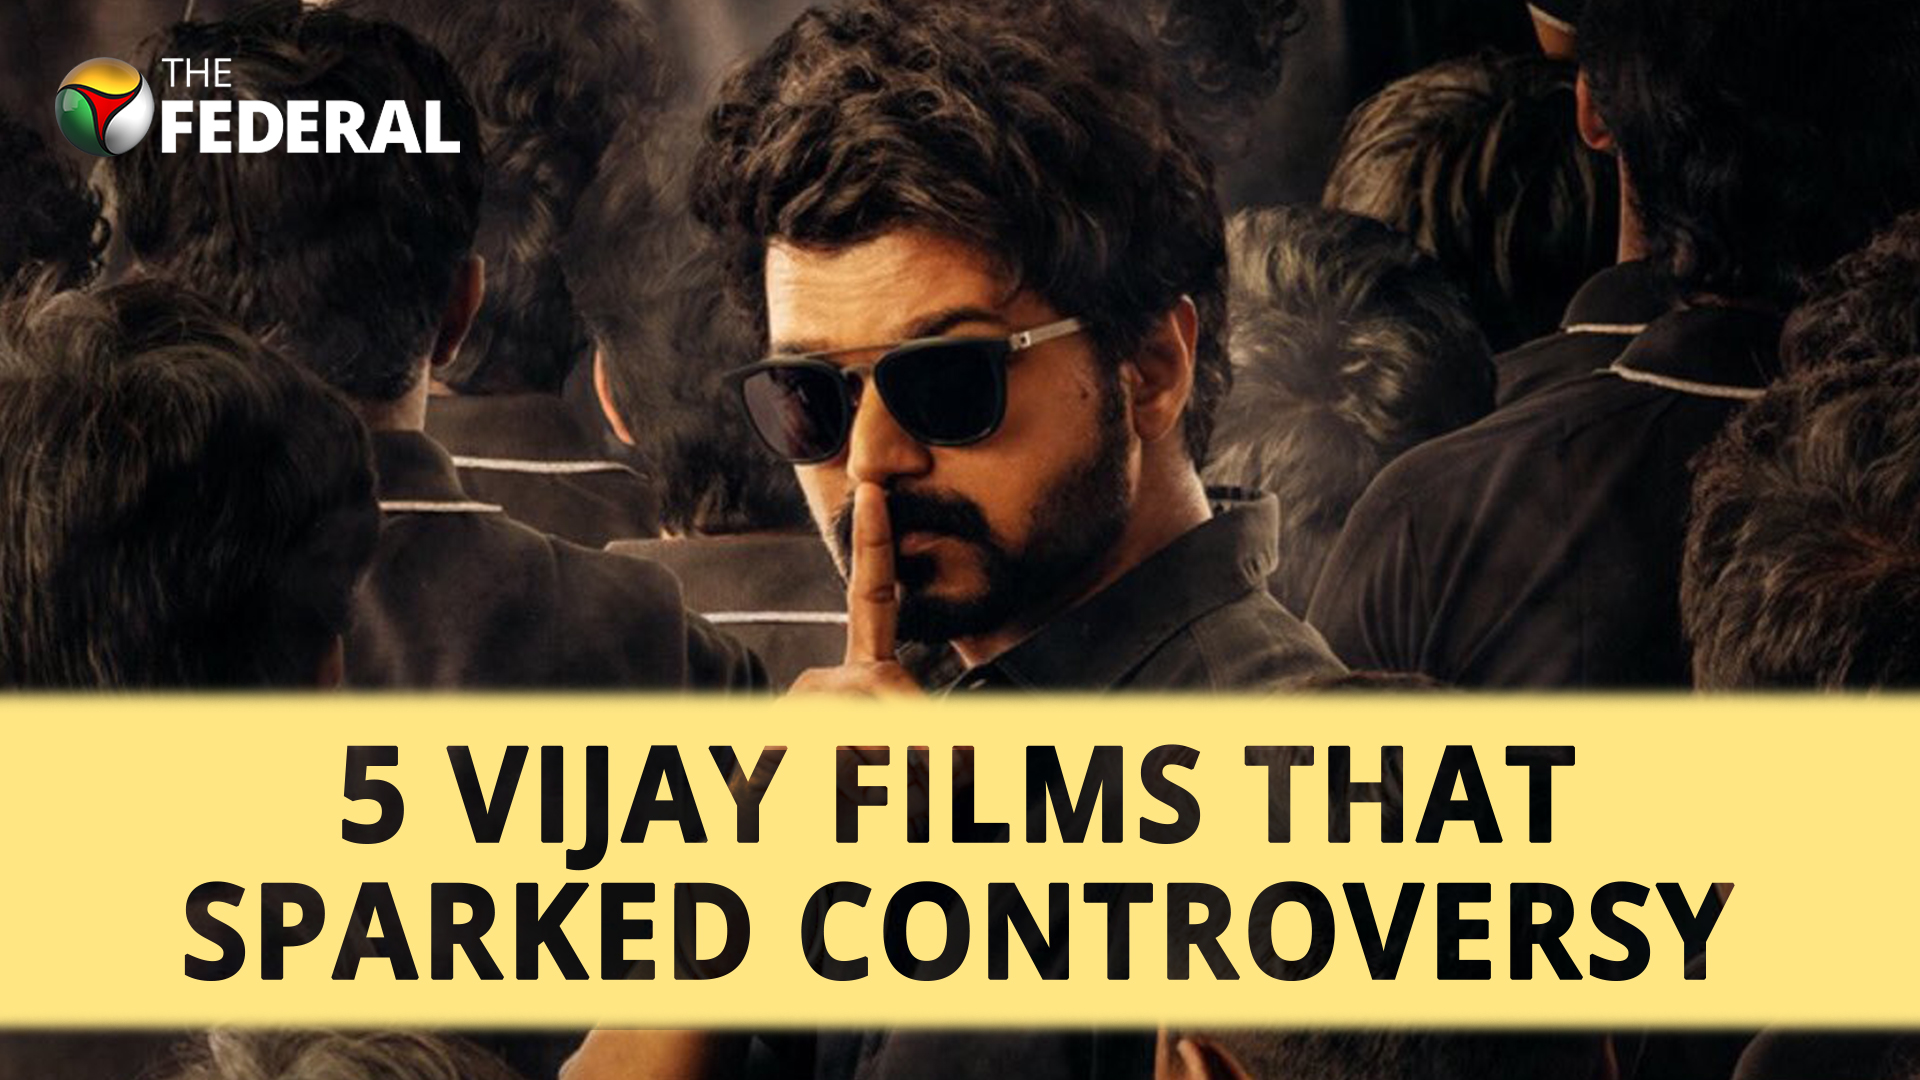 Five Vijay films that sparked controversy